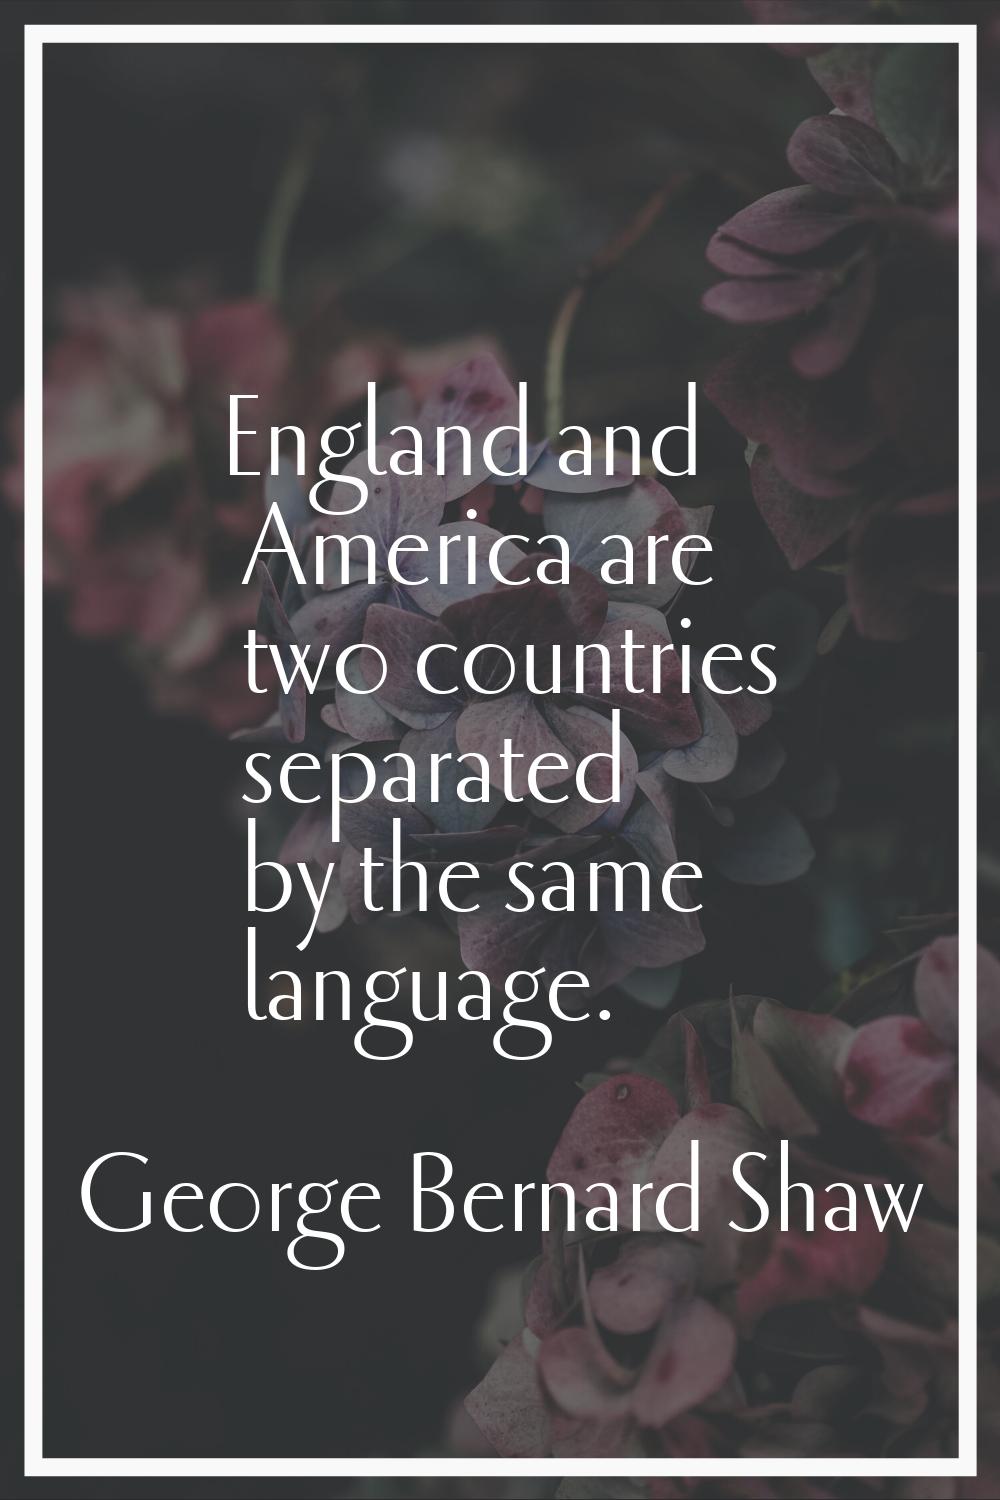 England and America are two countries separated by the same language.